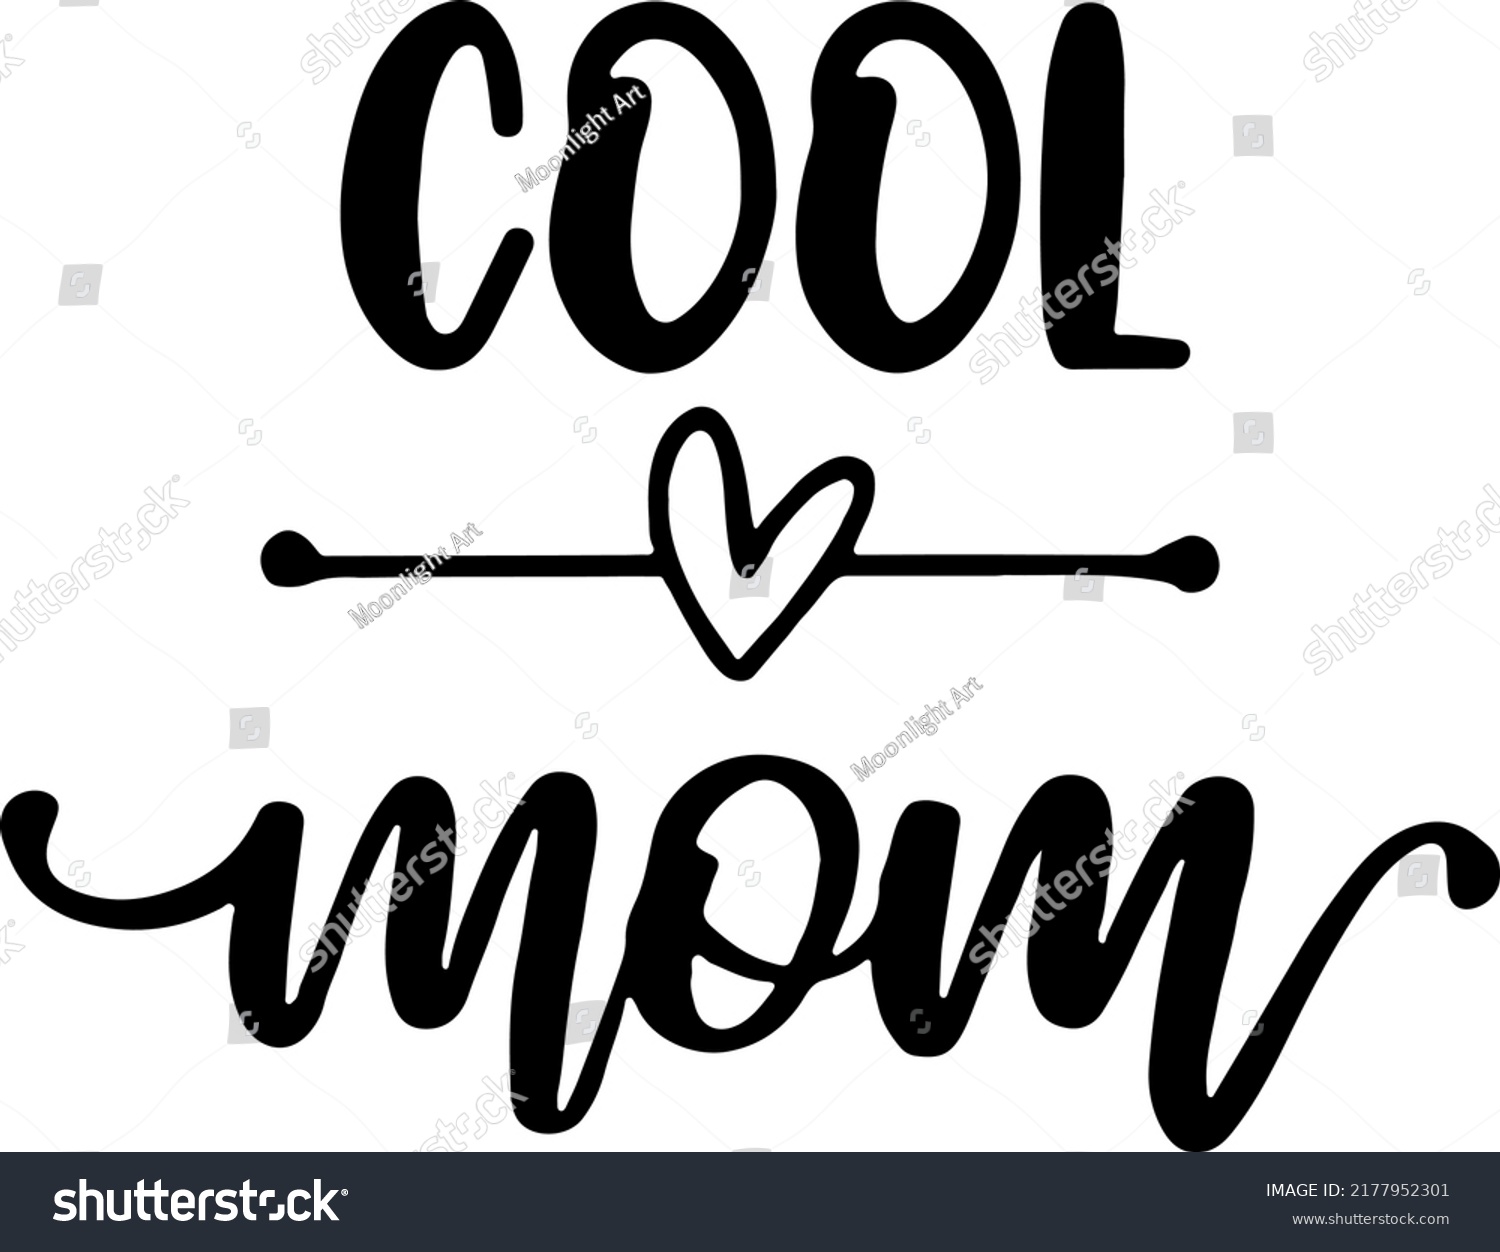 SVG of Cool Mom Typograpy Svg, Mom Life Svg, Mommy, Mother, Mama, Mothers Day Gifts, Cool Mom Gifts, Svg Cut File, Instant Download svg